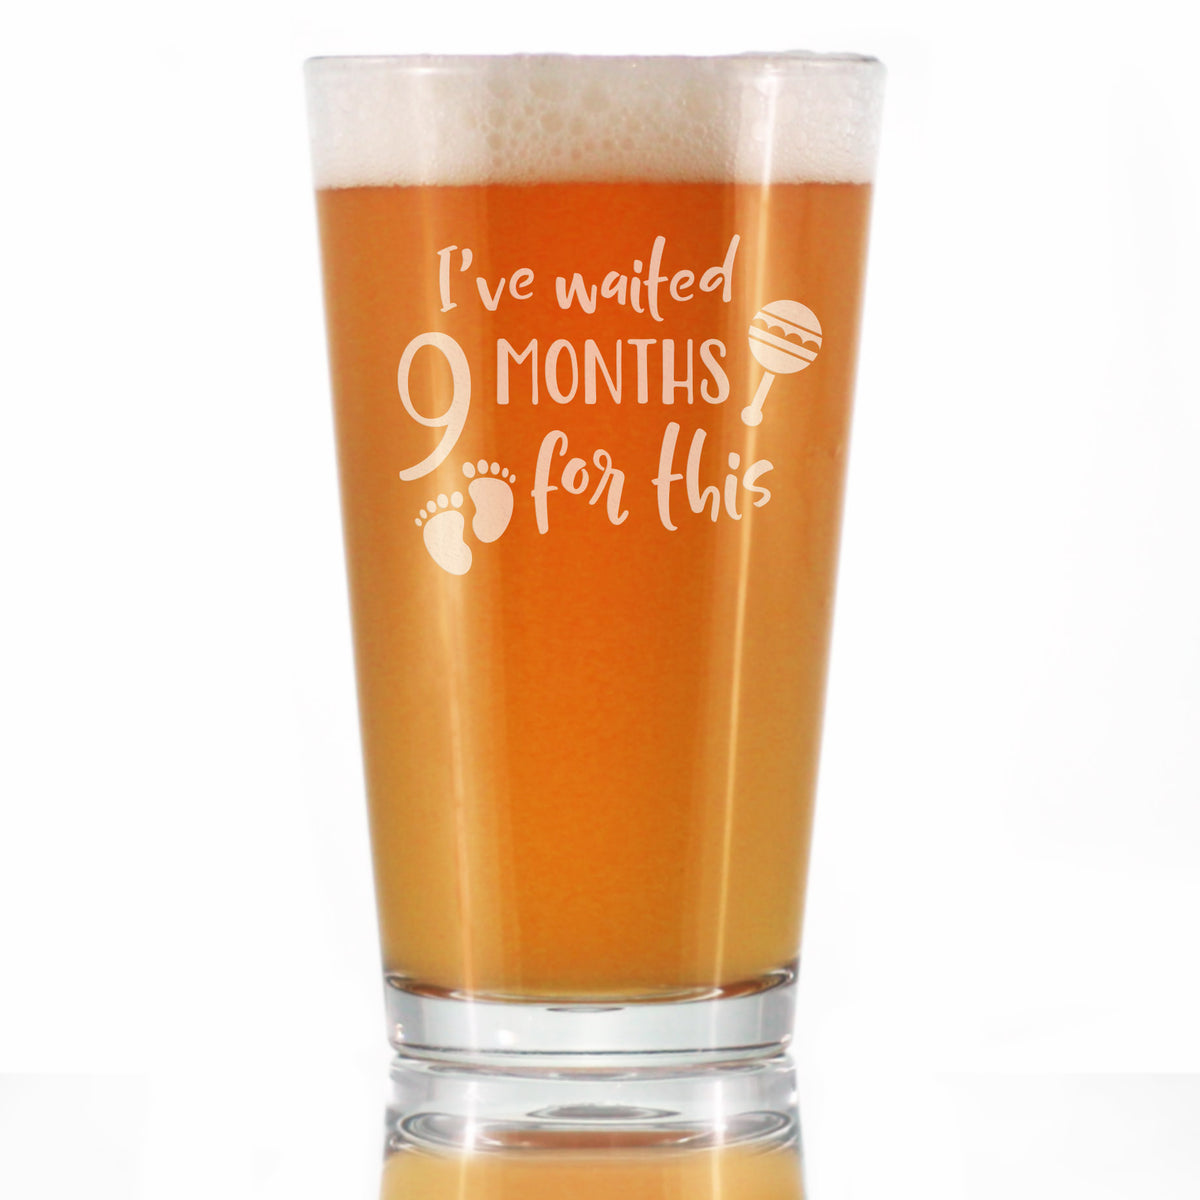 Waited 9 Months For This - Funny New Mom Pint Glass for Beer - Gifts for Expectant Moms - Post-Pregnancy Glasses - 16 oz